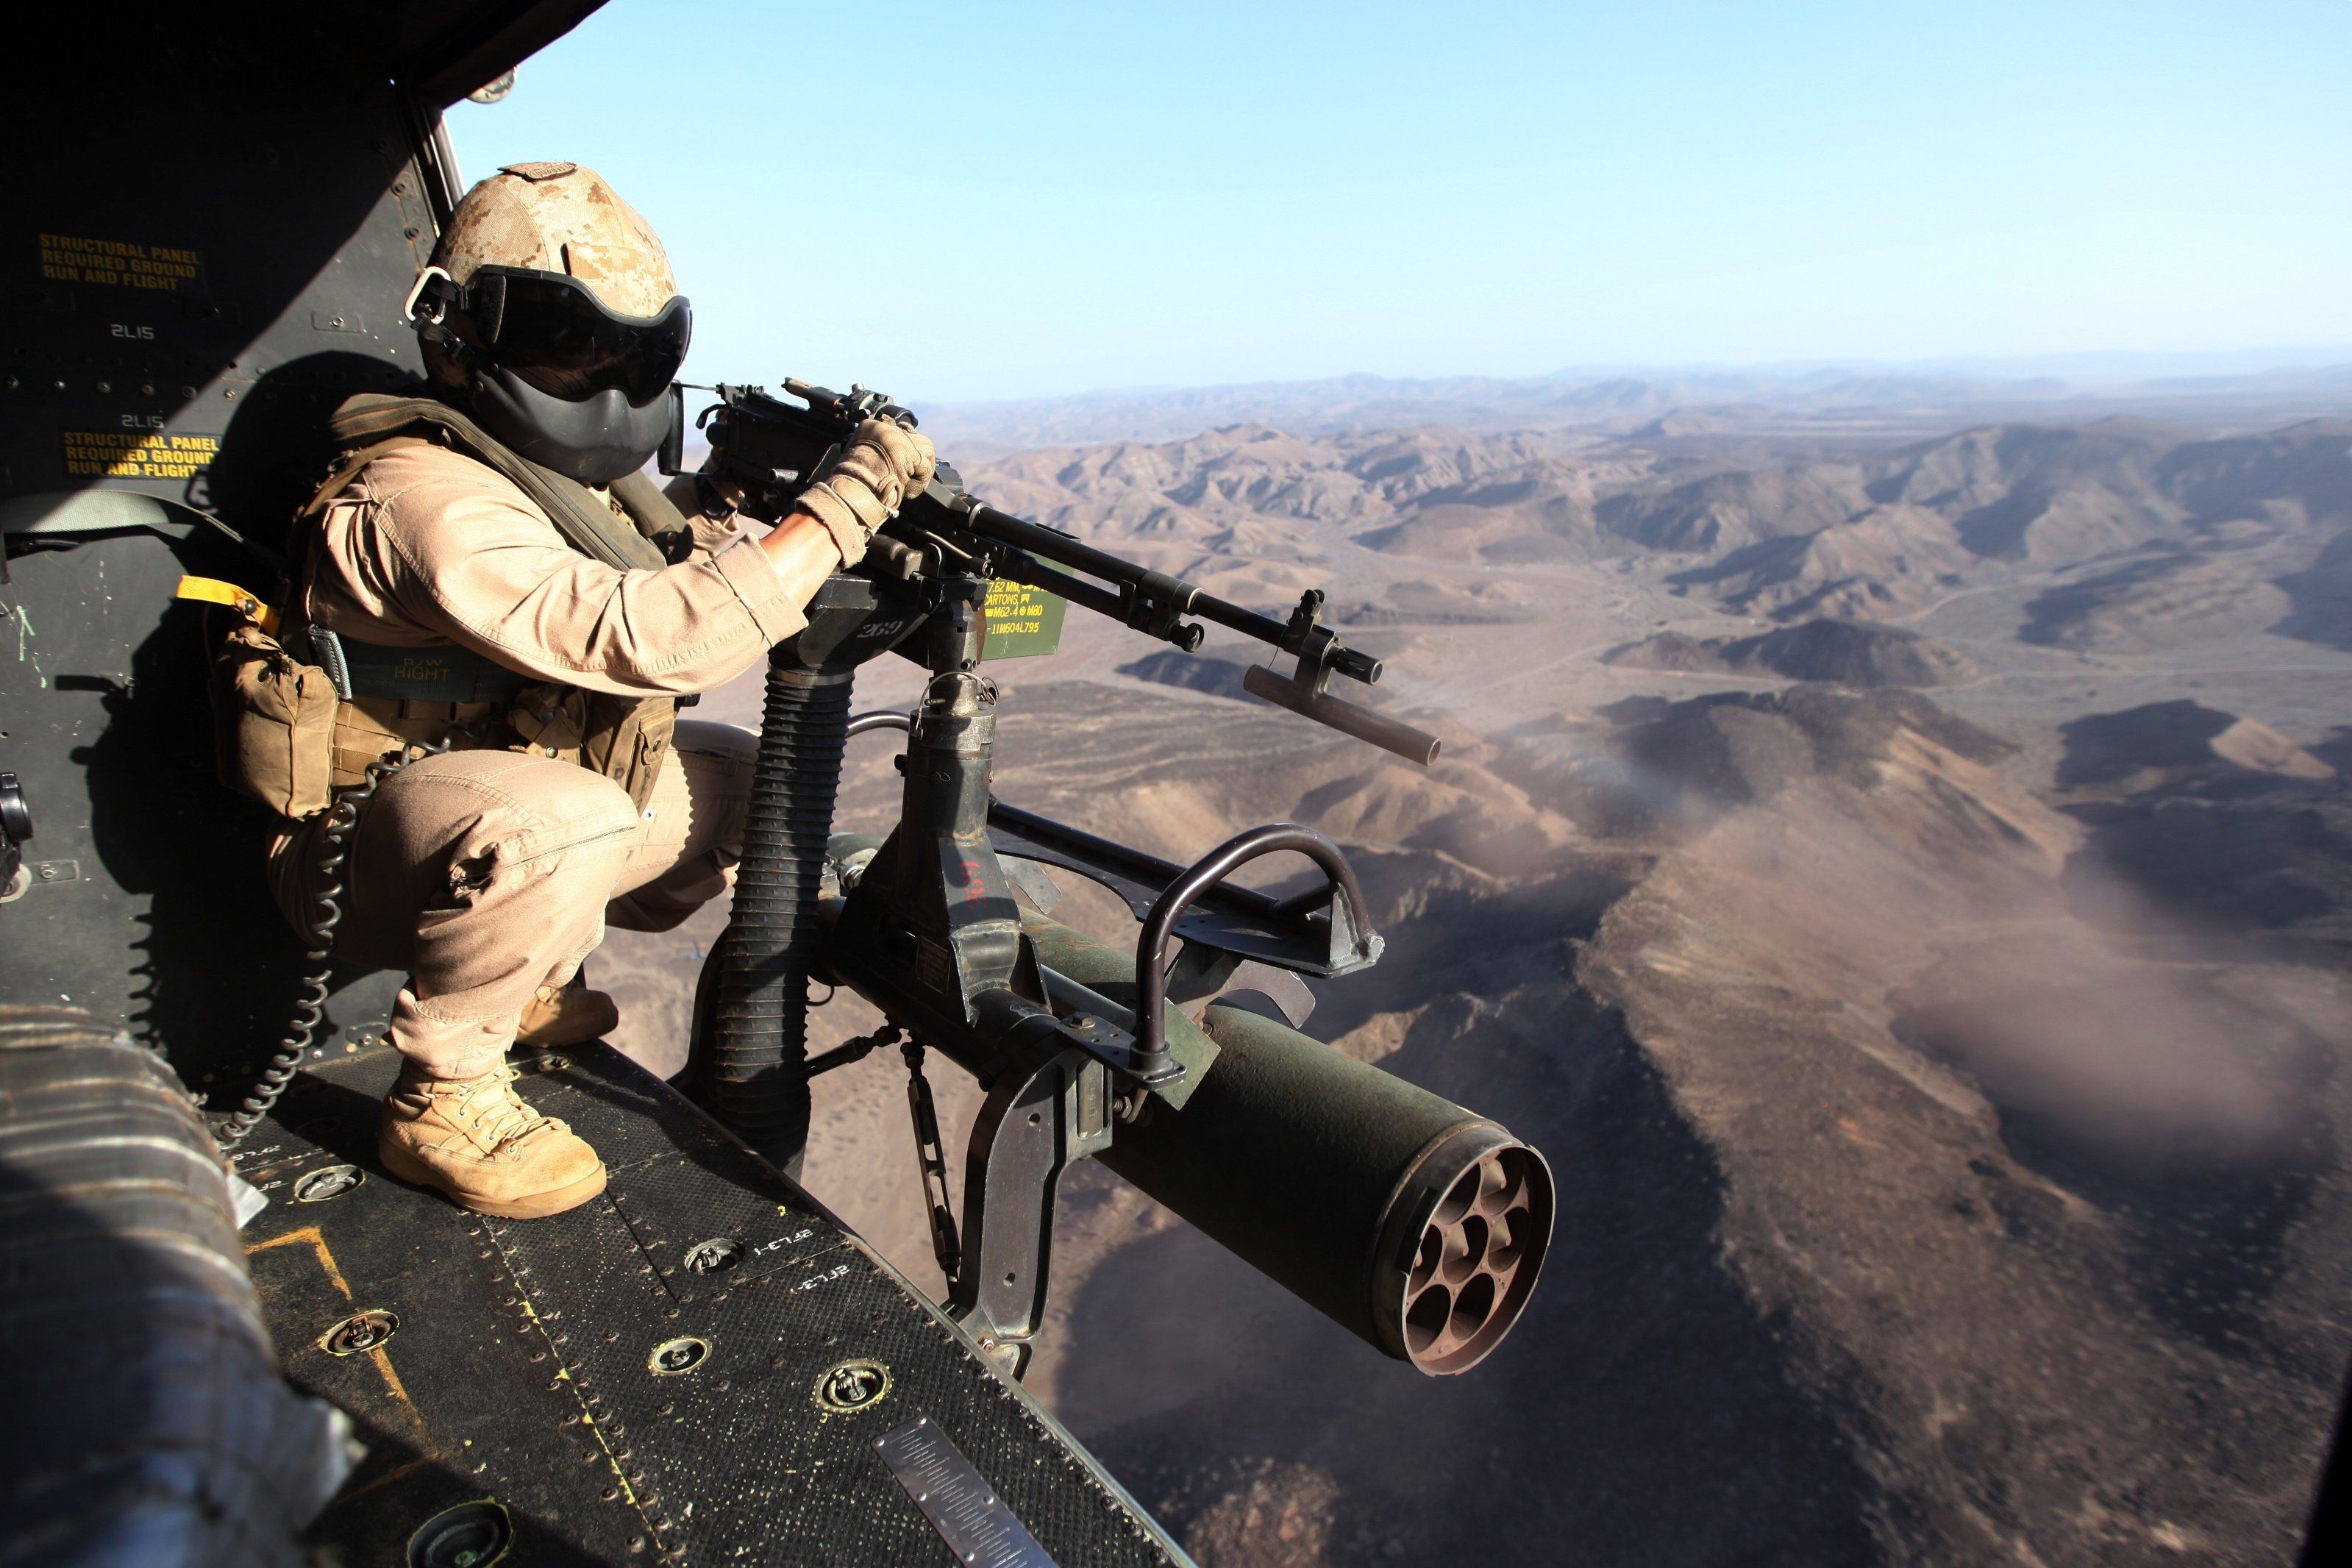 Free photo: Aerial Photography of Person Holding Machine Gun during Daytime, Helicopter, Man